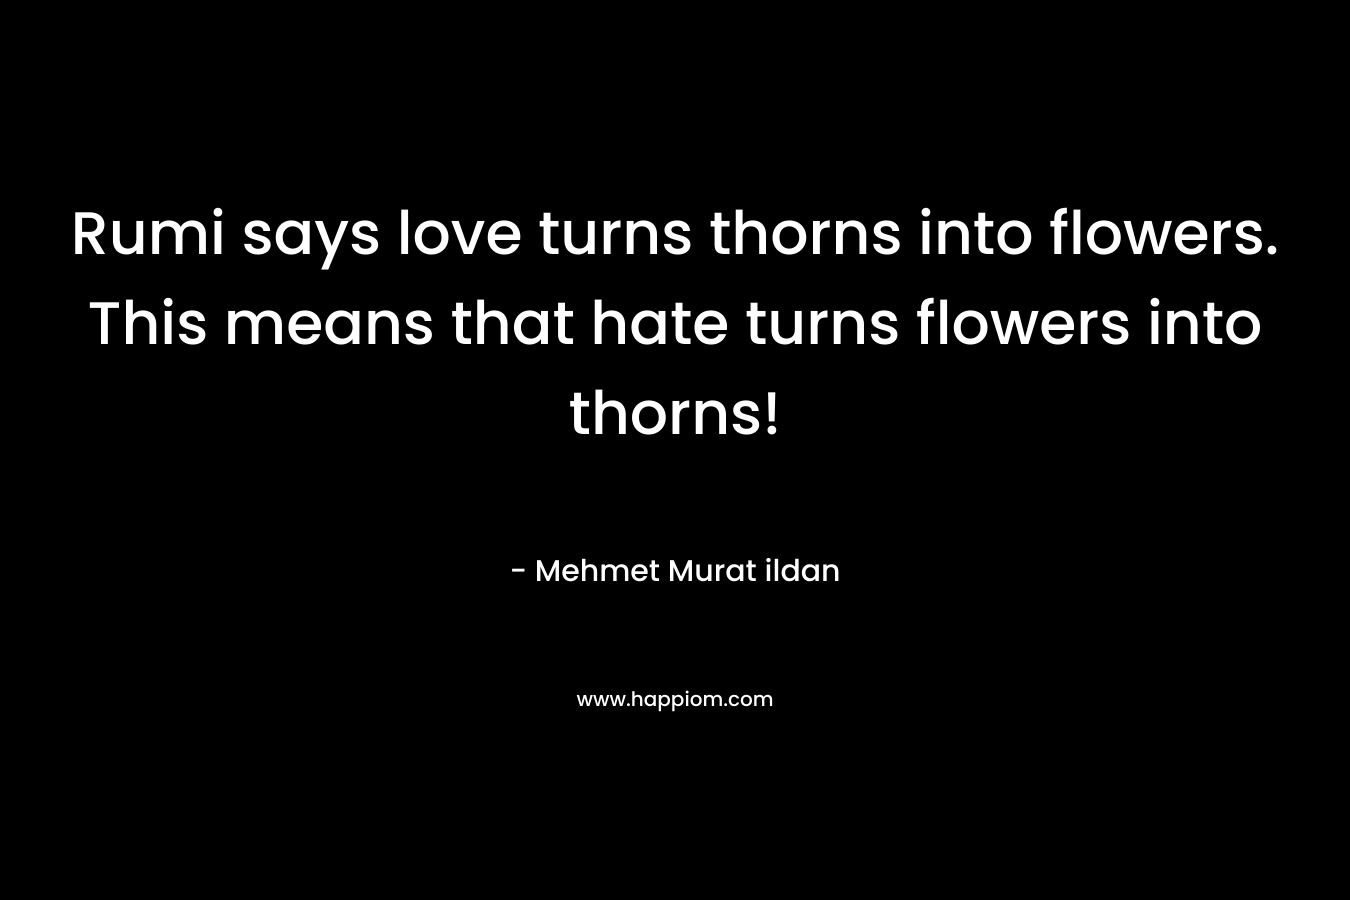 Rumi says love turns thorns into flowers. This means that hate turns flowers into thorns!